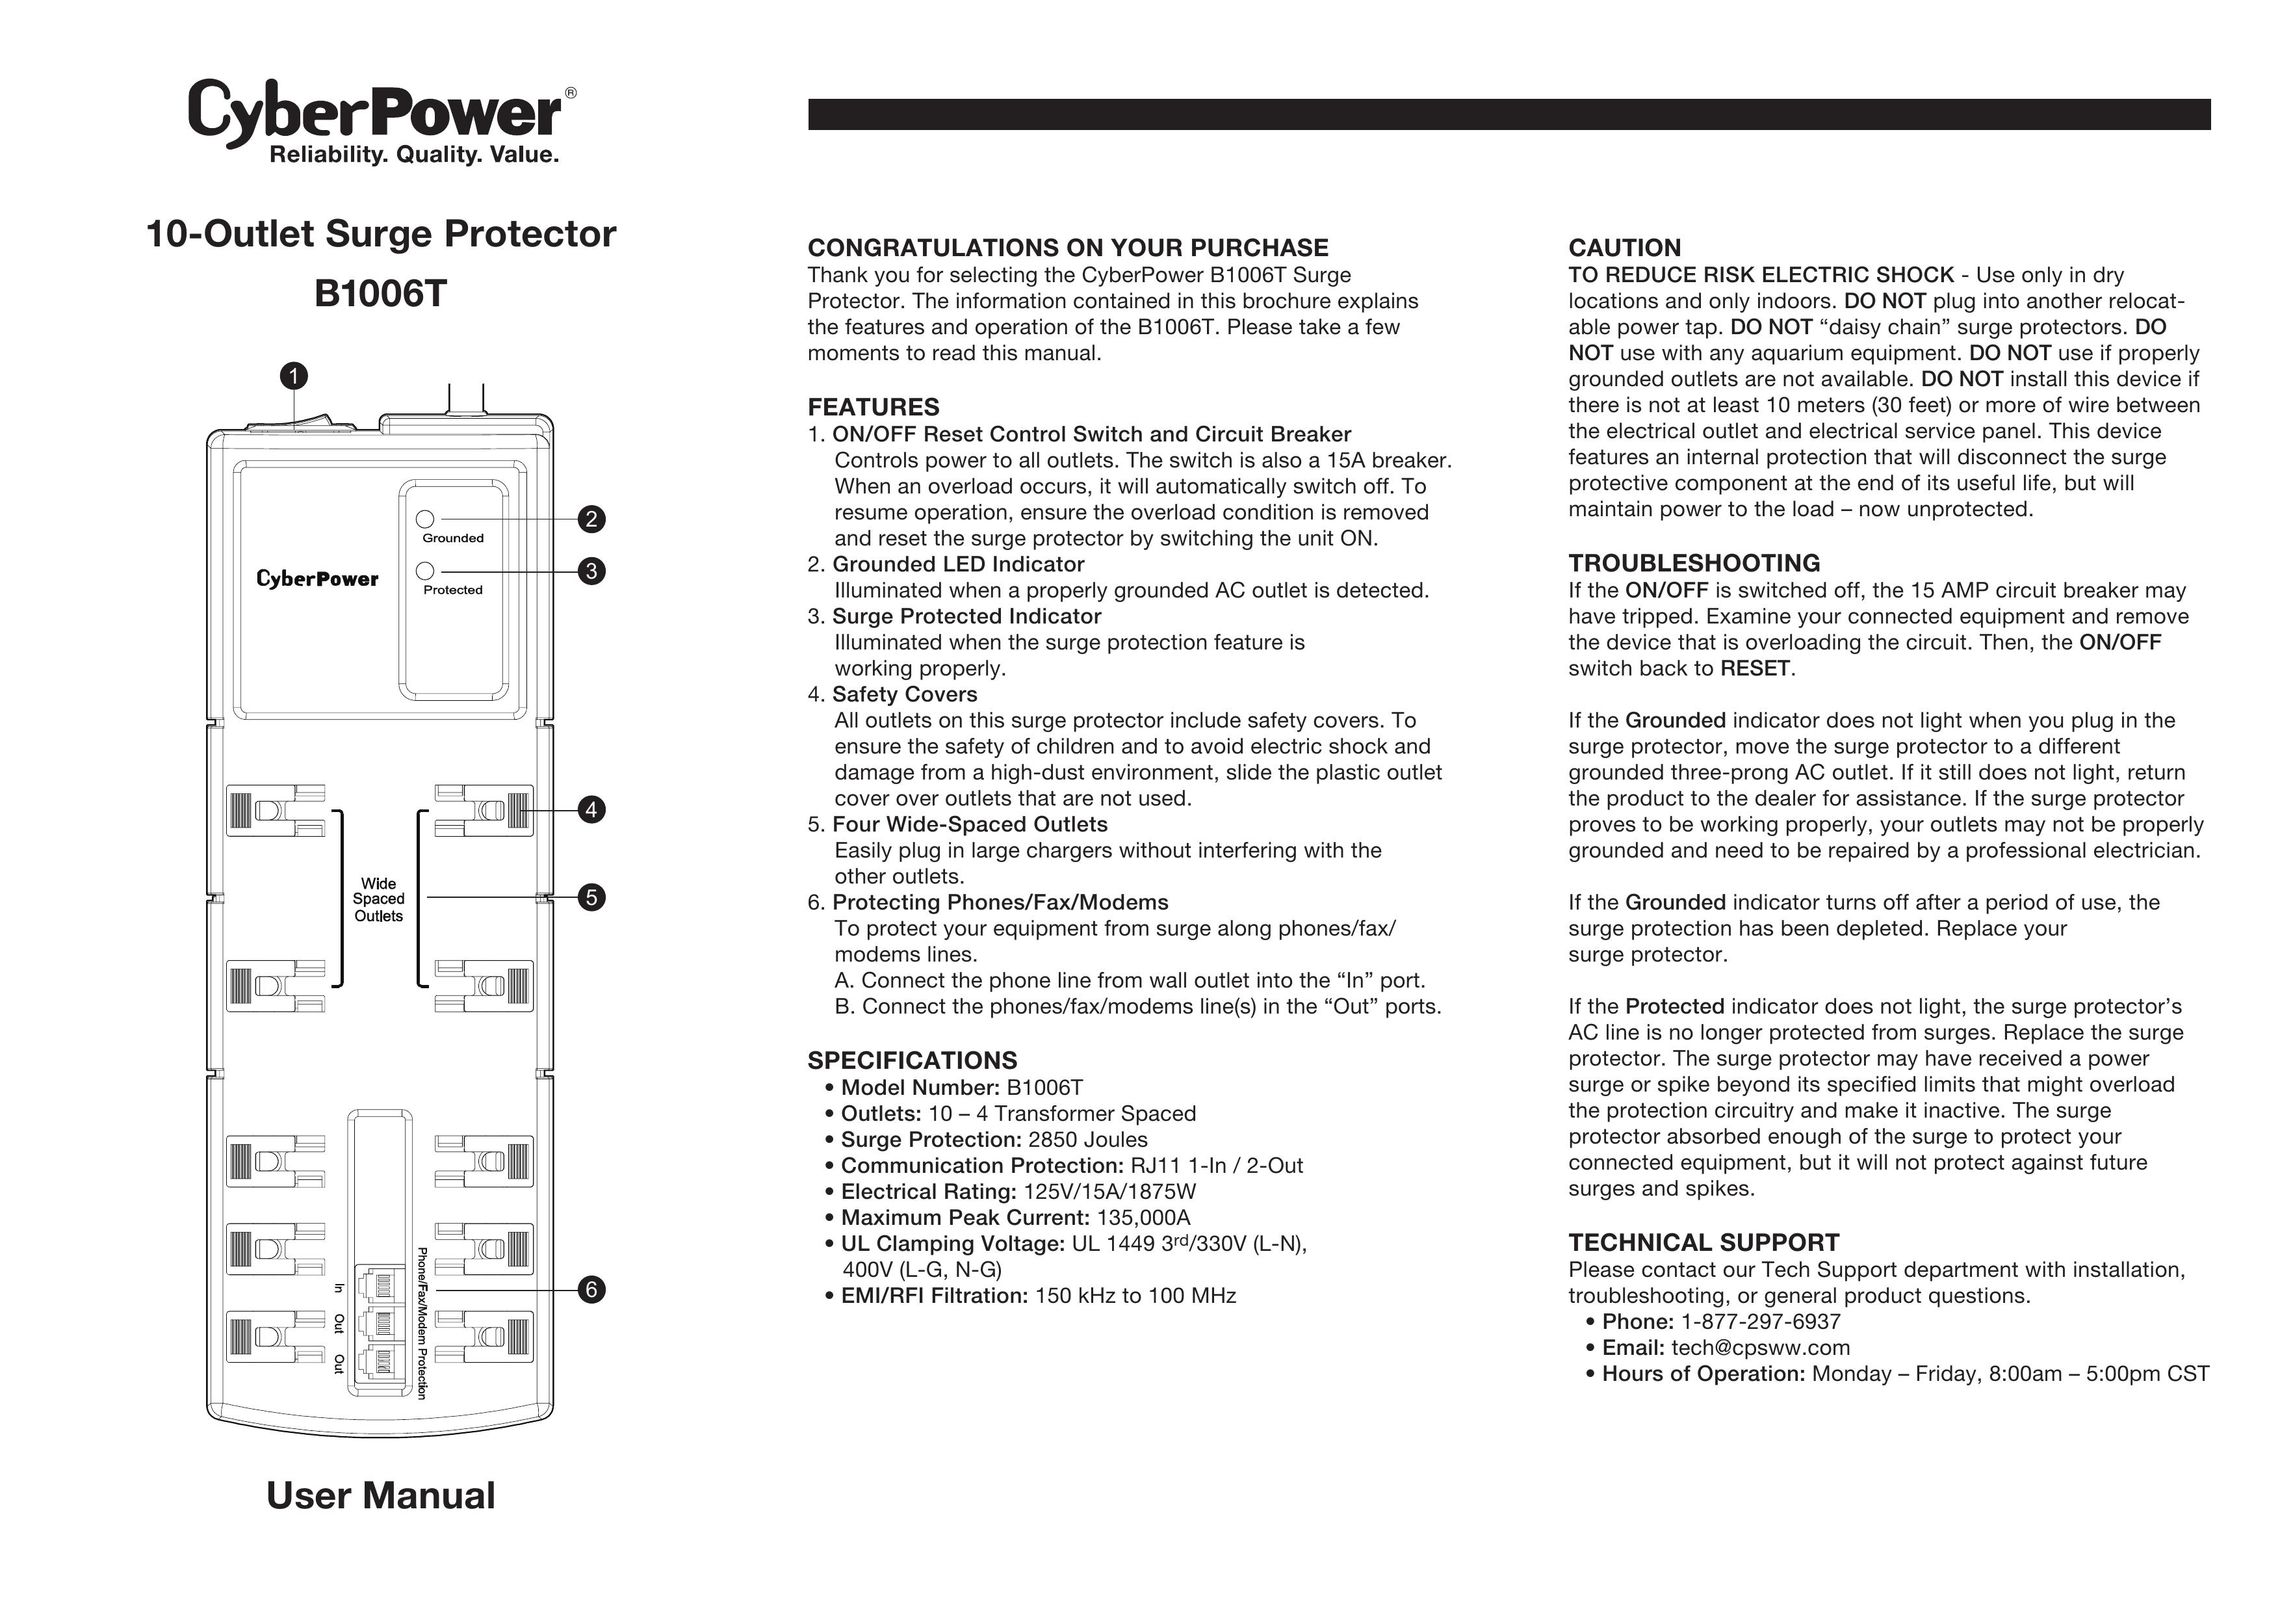 CyberPower B1006T Surge Protector User Manual